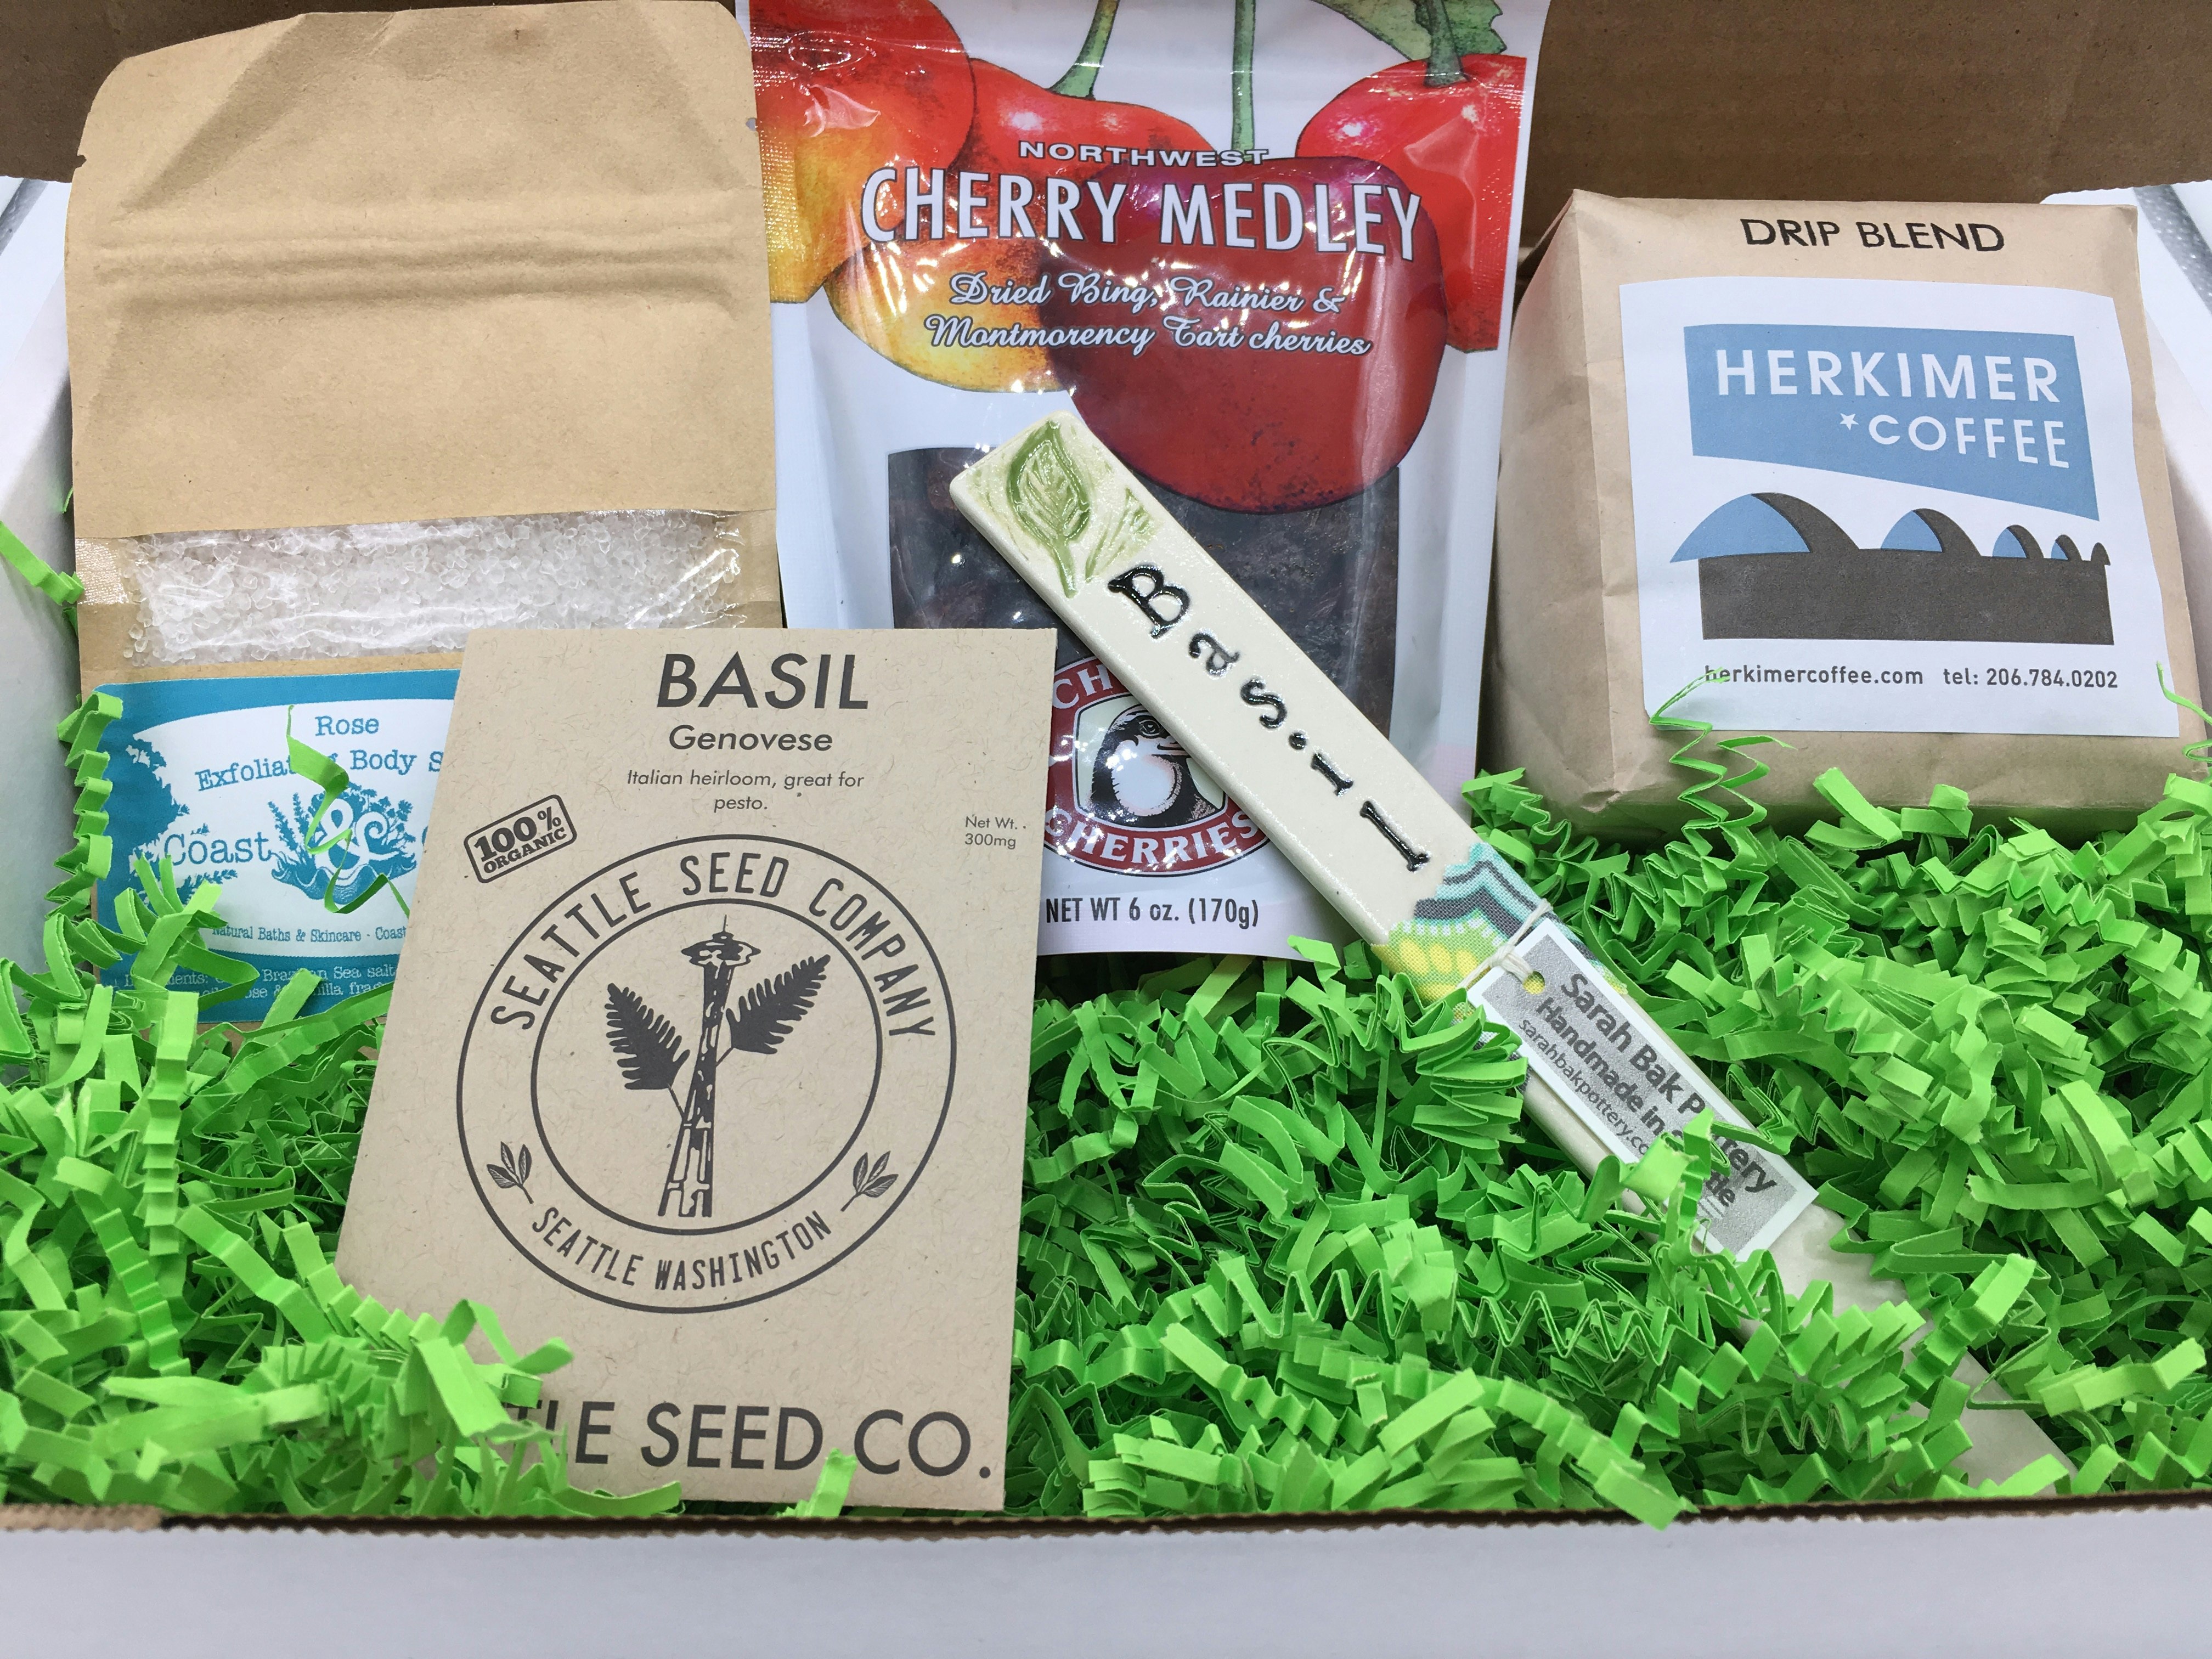 A box of Seattle-based products, including coffee and cherries